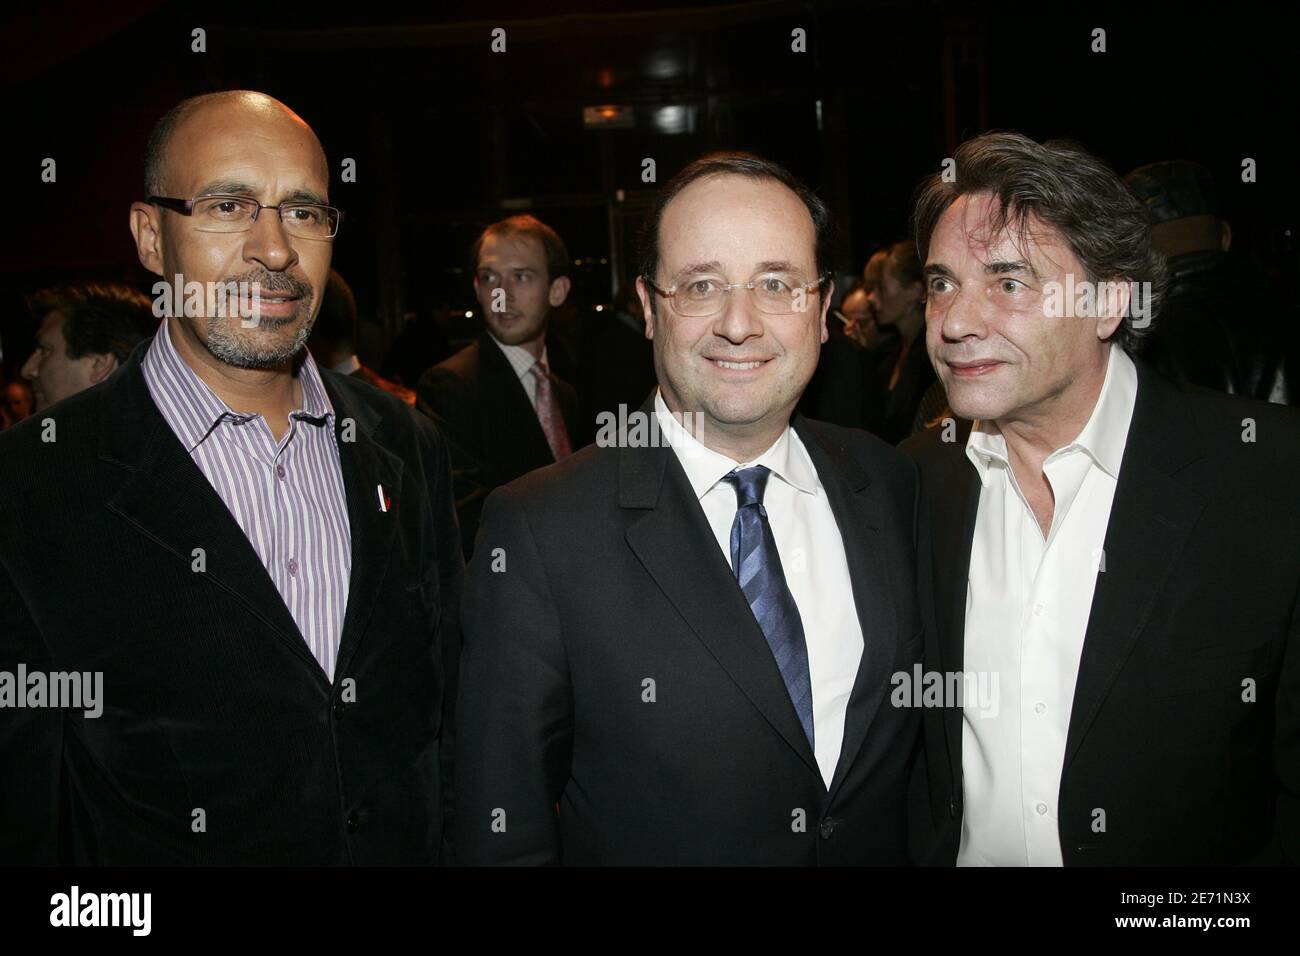 Harlem Desir, Francois Hollande and Yves Simon attend the annual dinner for godmothers and godfathers of French anti-racism association 'SOS Racisme' held at the Cabaret Sauvage in Paris, France on january 29, 2007. Photo by Mousse/ABACAPRESS.COM Stock Photo